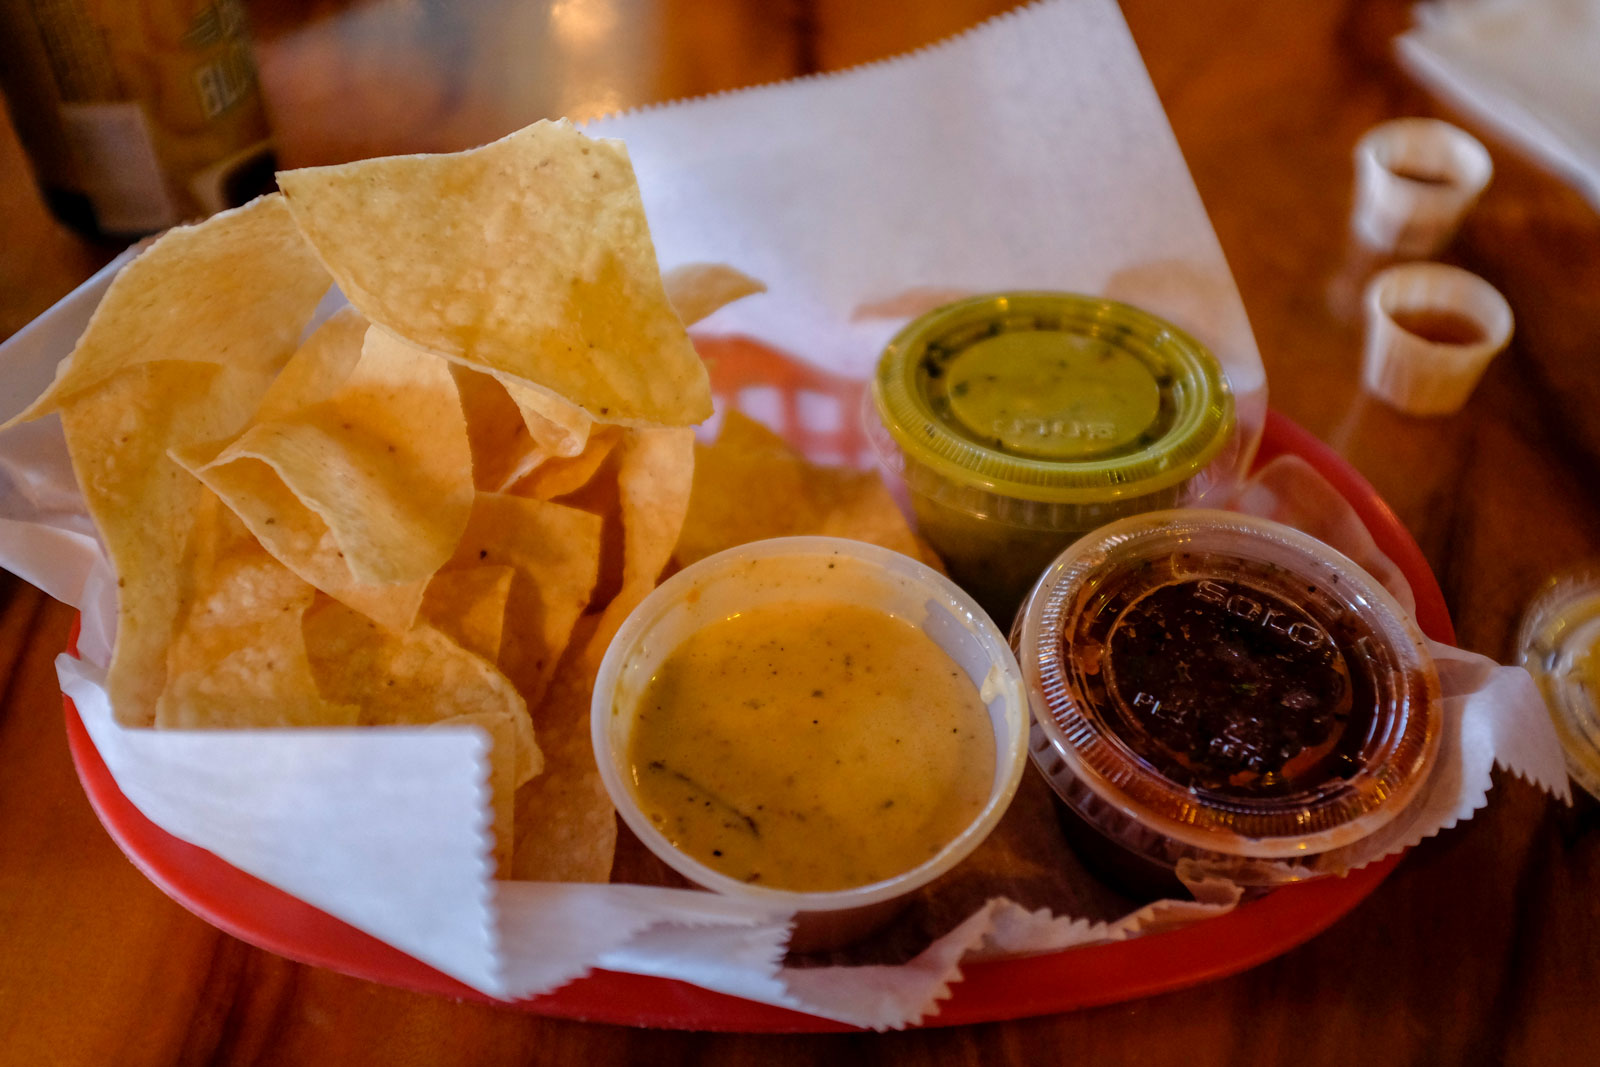 Chips and dips at Casita Taqueria